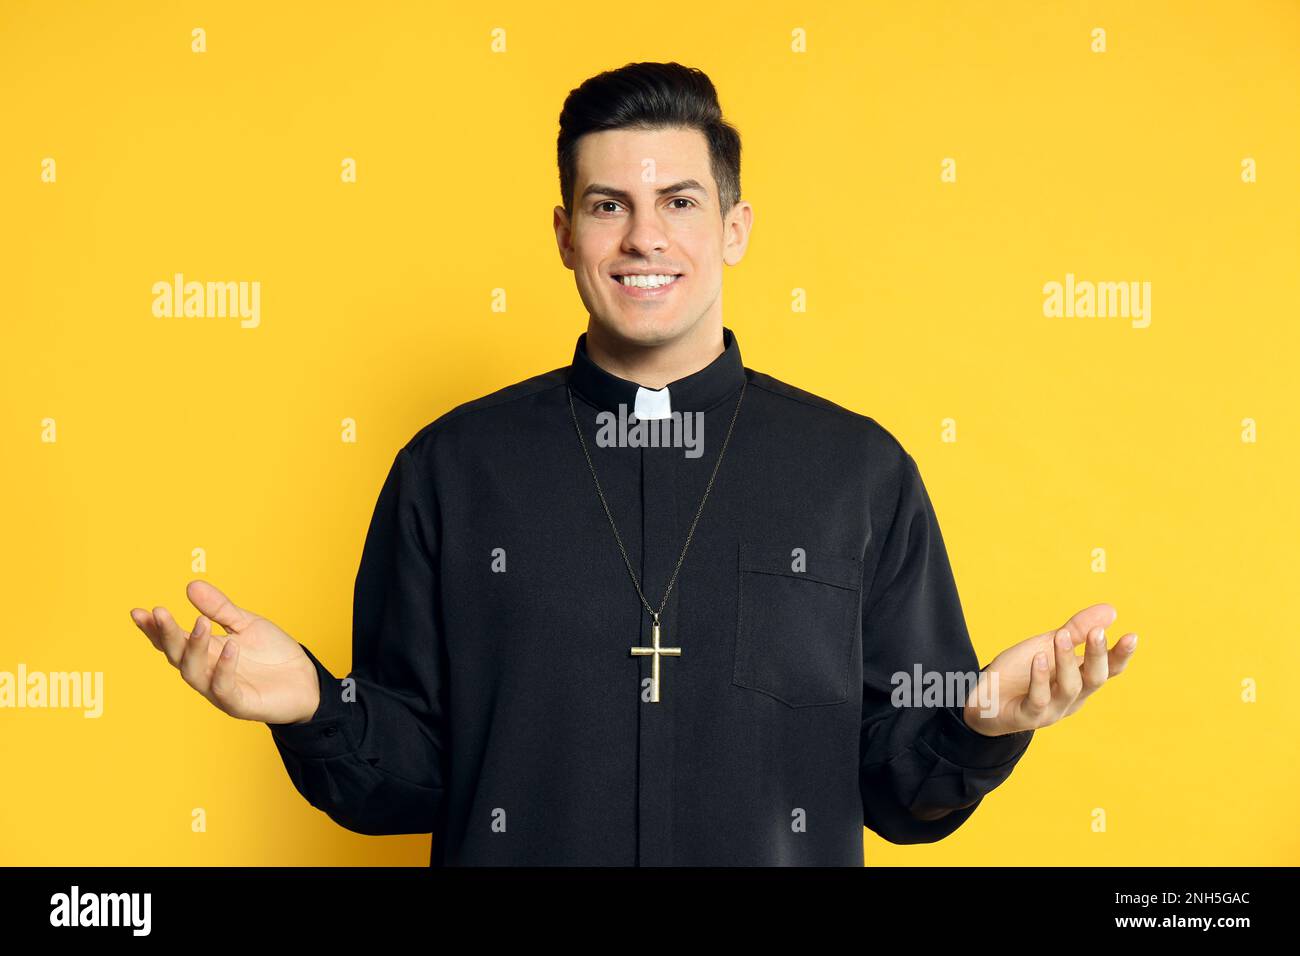 Priest wearing cassock with clerical collar on yellow background Stock Photo